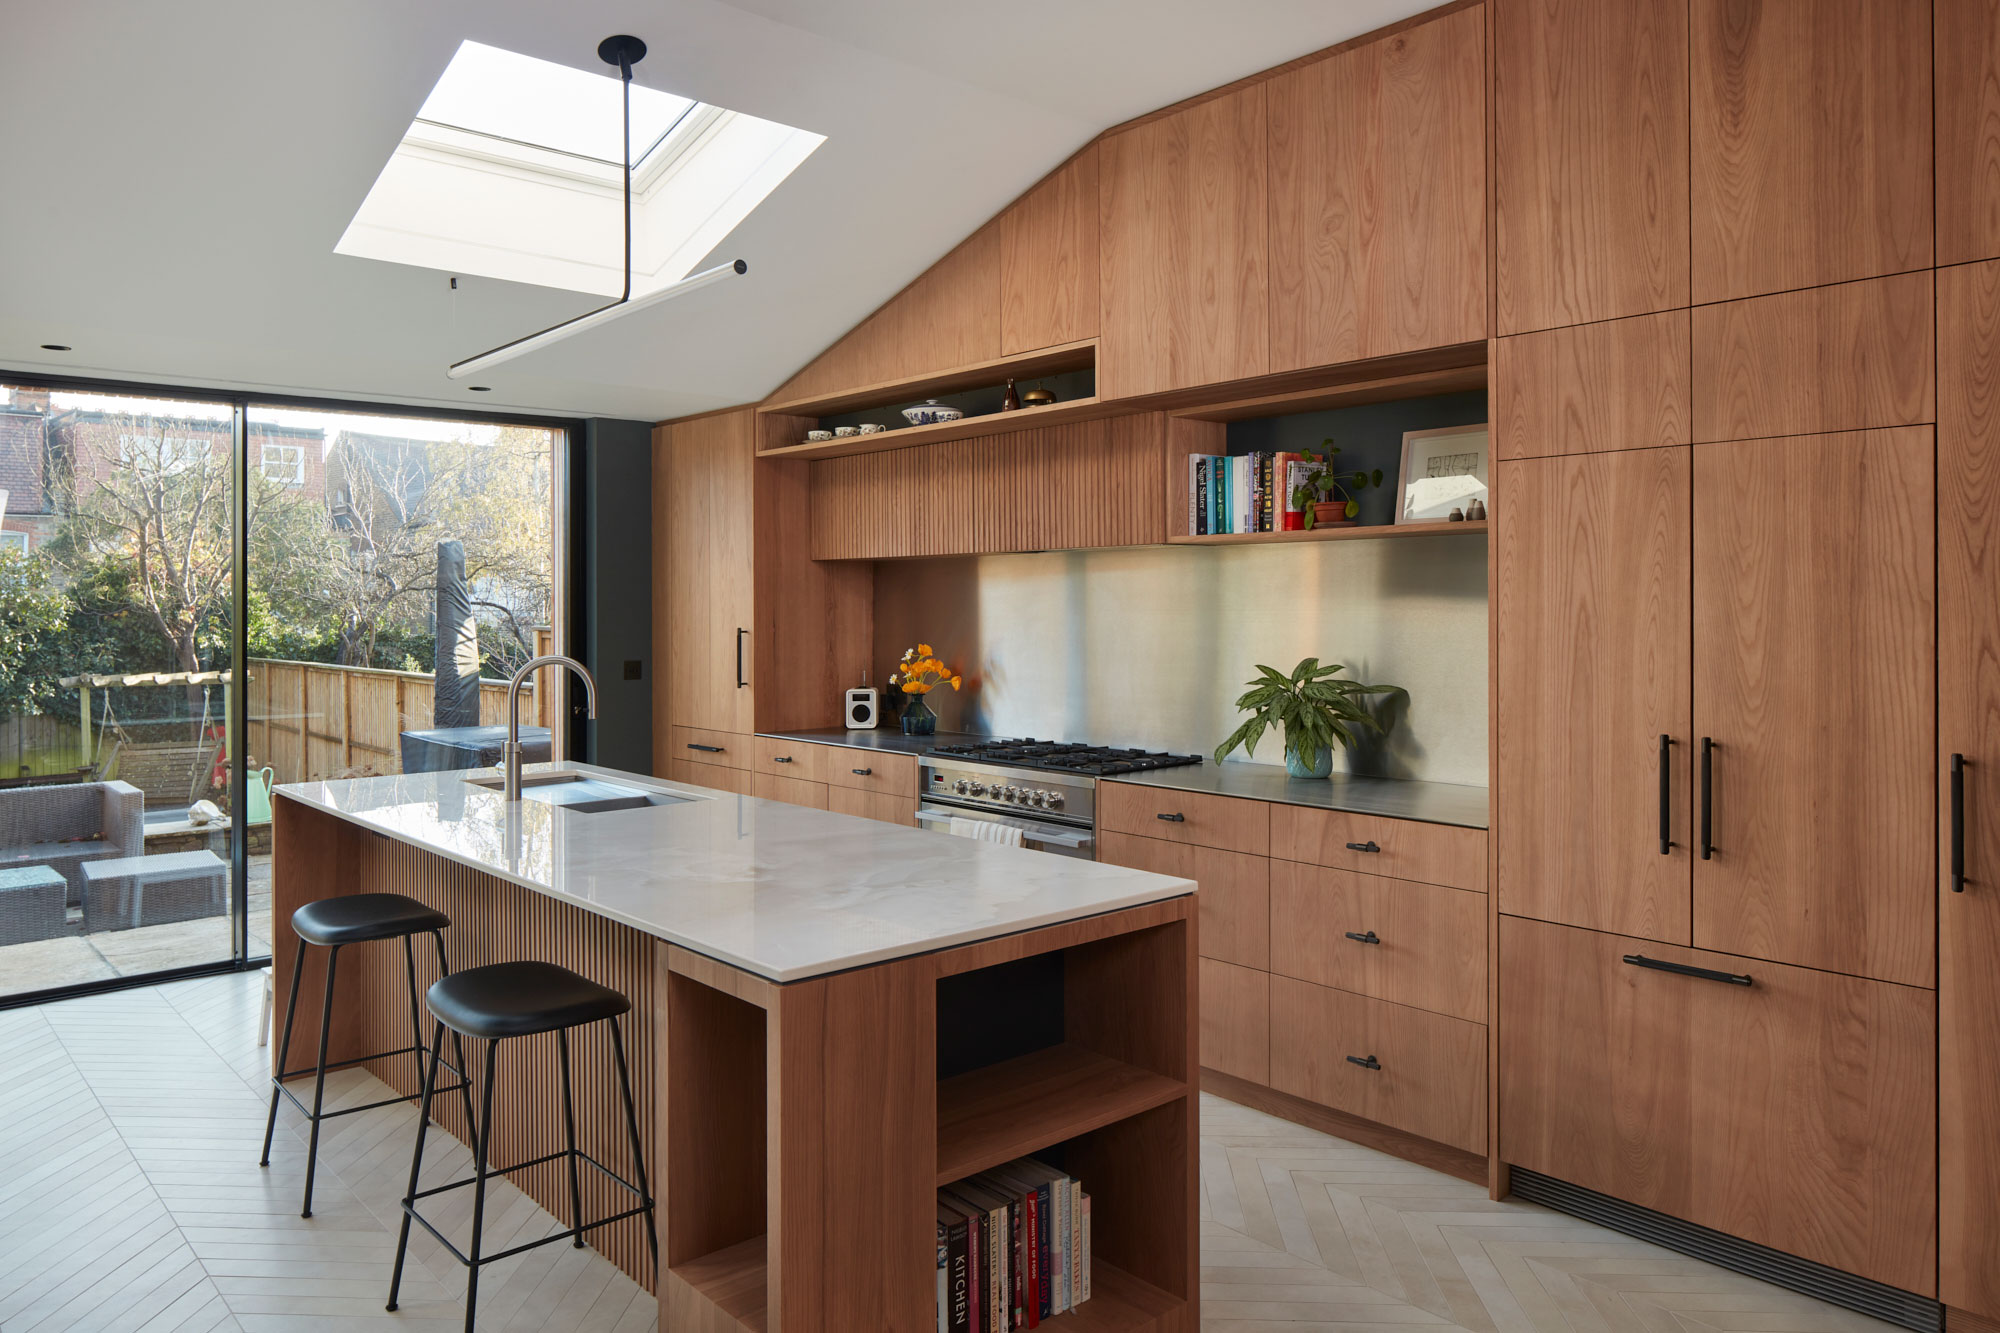 The Main Company kitchen design for Wimbledon client